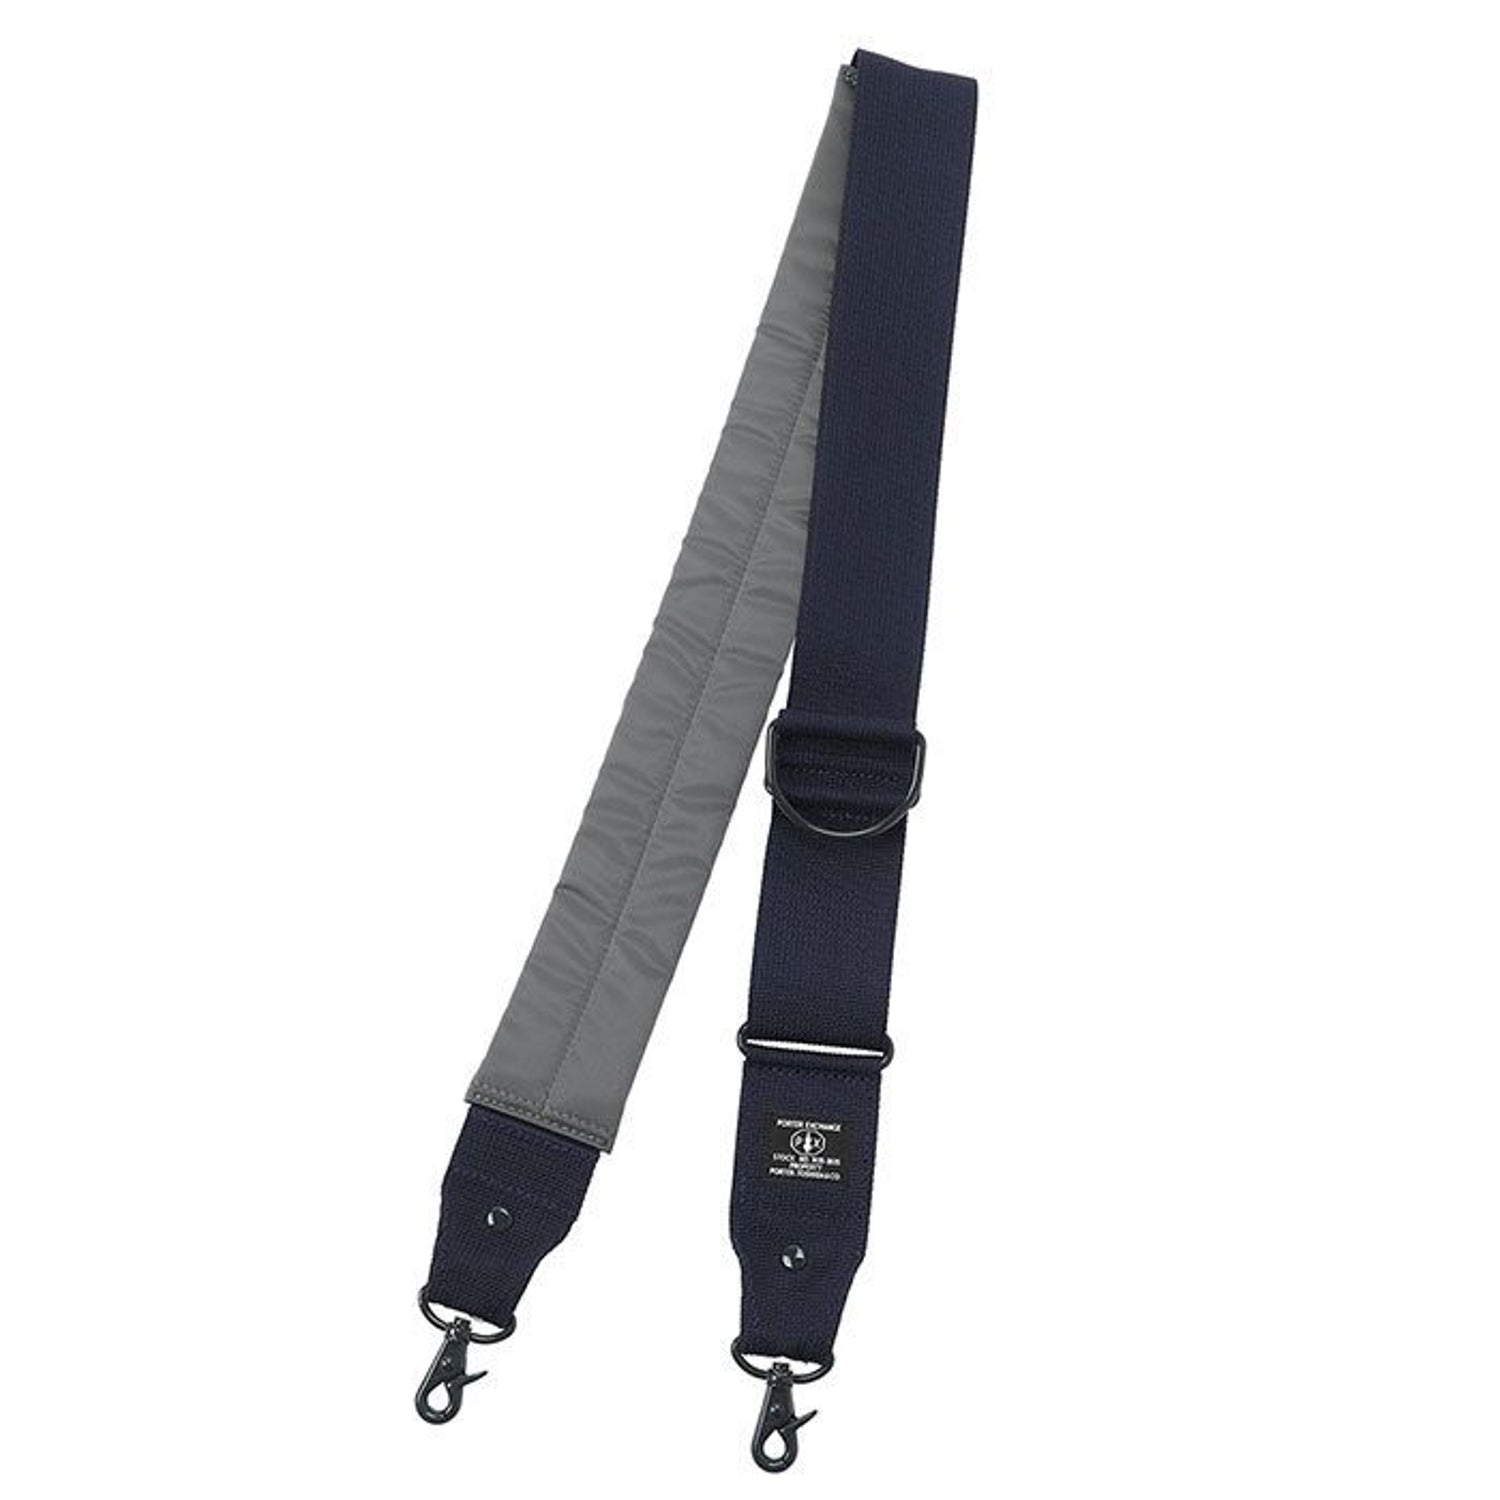 PORTER - PX Tanker Carrying Equipment Strap 50 - (Silver Gray) view 1